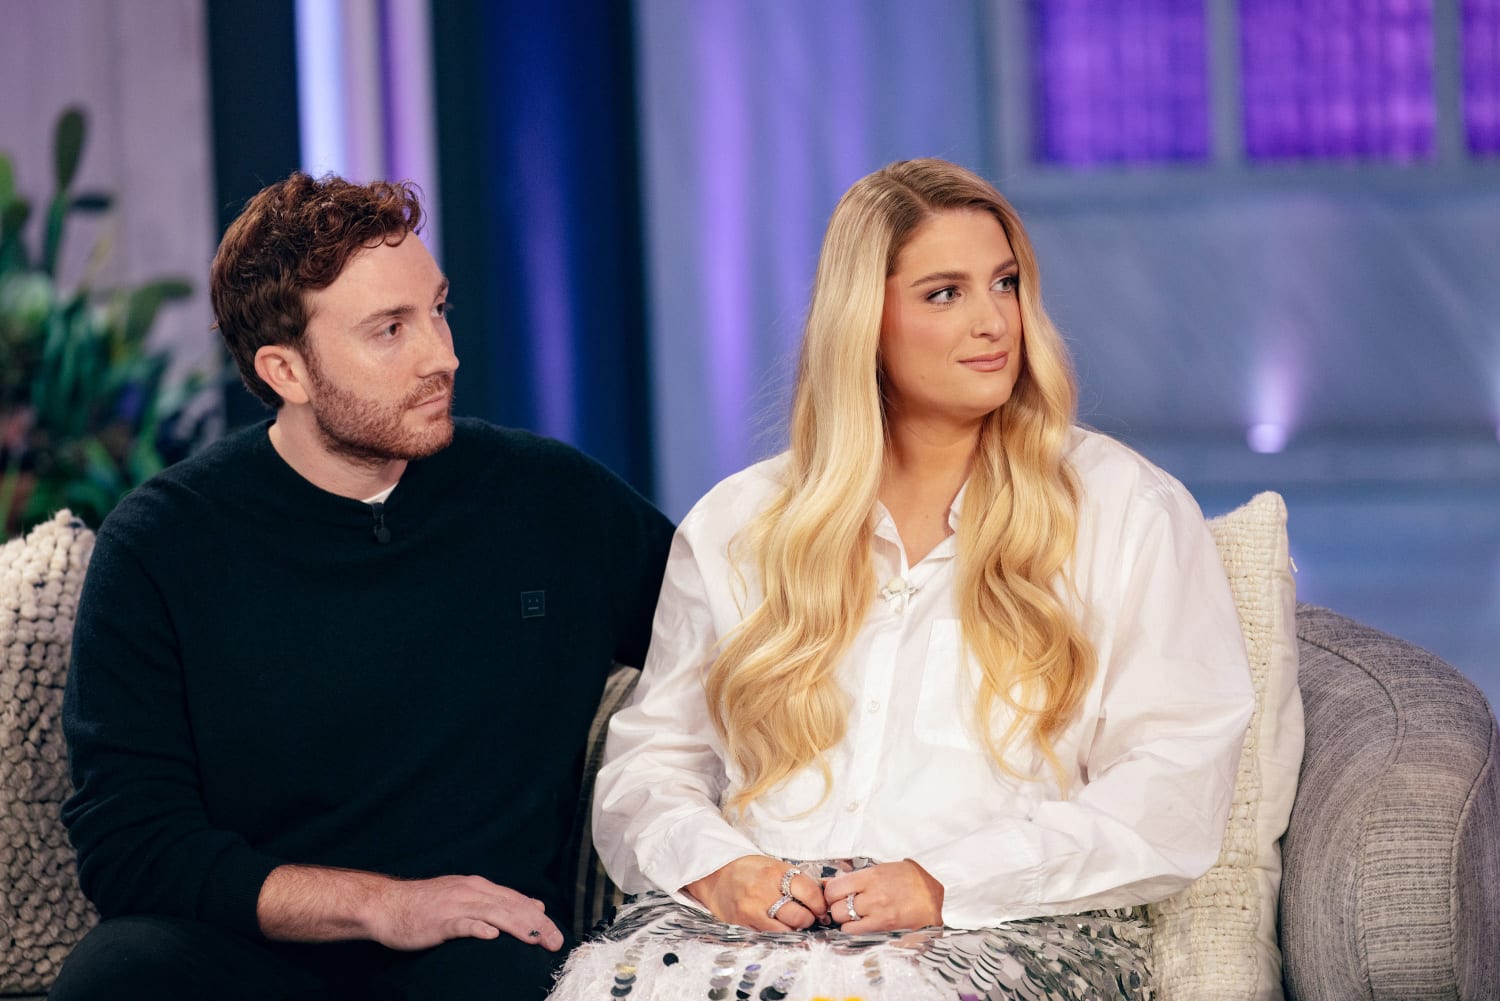 Signs Of Vaginismus As Meghan Trainor Speaks Out About Condition